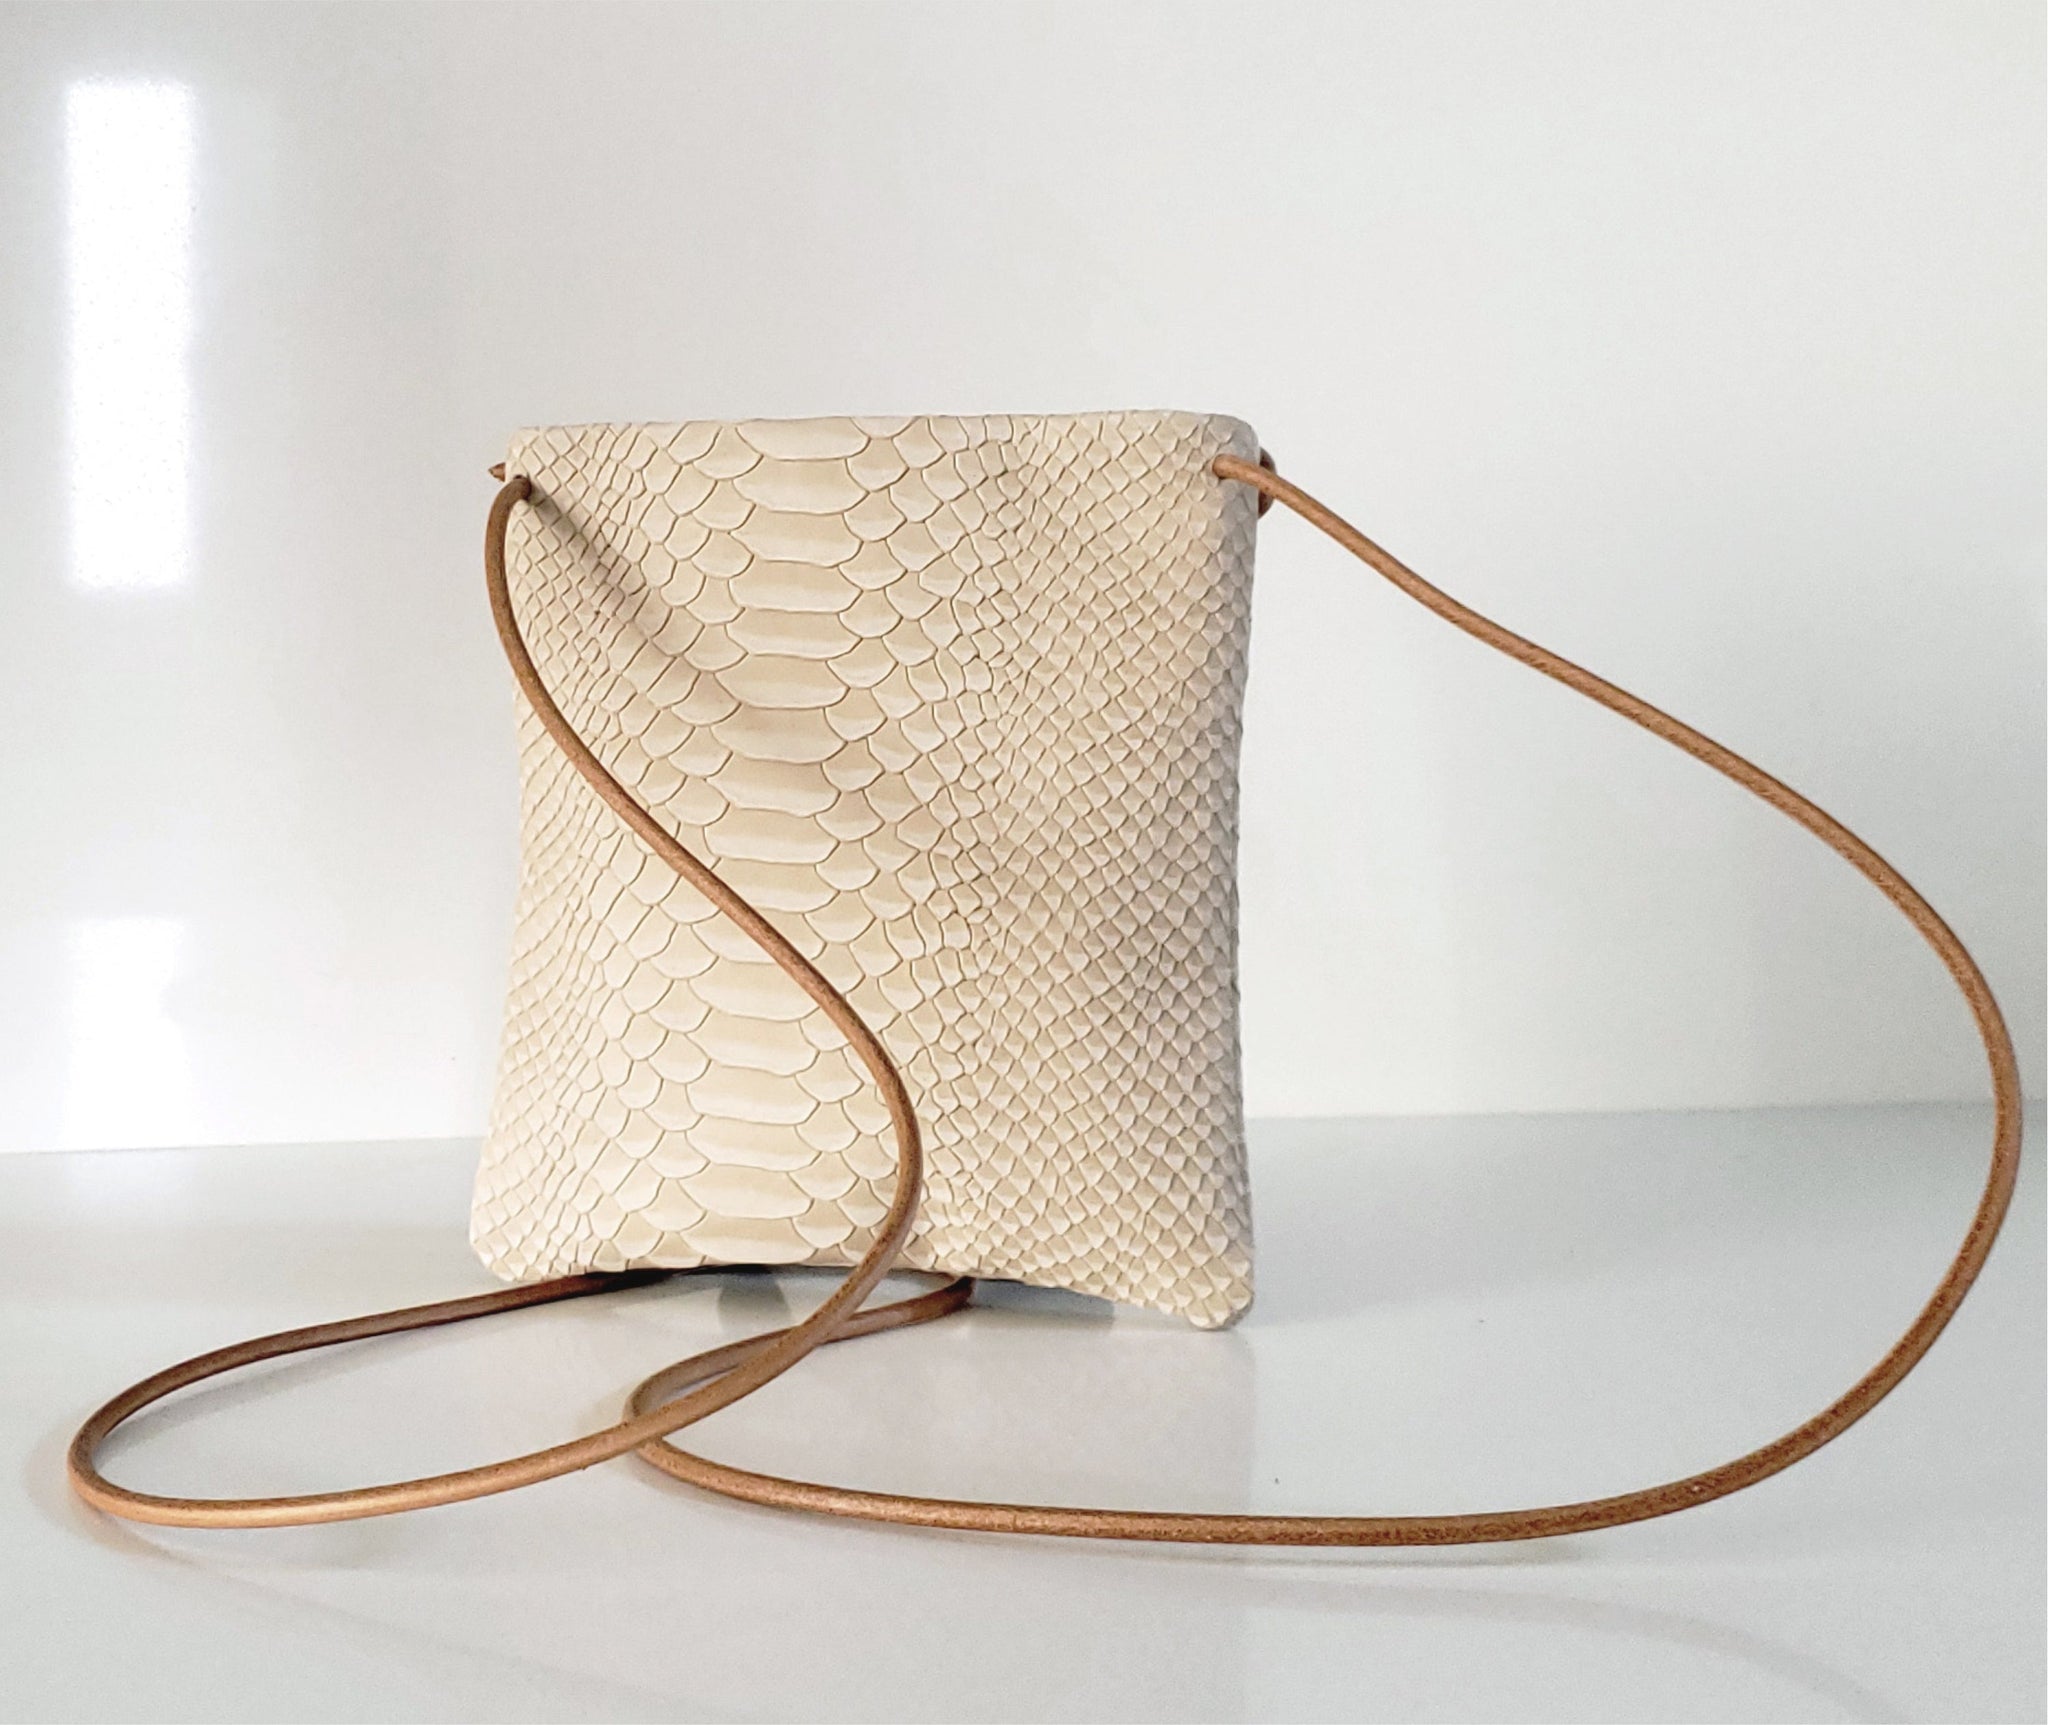 This handmade small leather shoulder bag is crafted with rich python-embossed soft Italian leather, and a round-shaped adjustable & detachable natural tan leather strap. Its high-end finish yet effortless look works night or day and fits cellphones, keys, cash, cards, lipstick, and more. It can be carried as a crossbody shoulder bag, or as an evening clutch without the strap.  